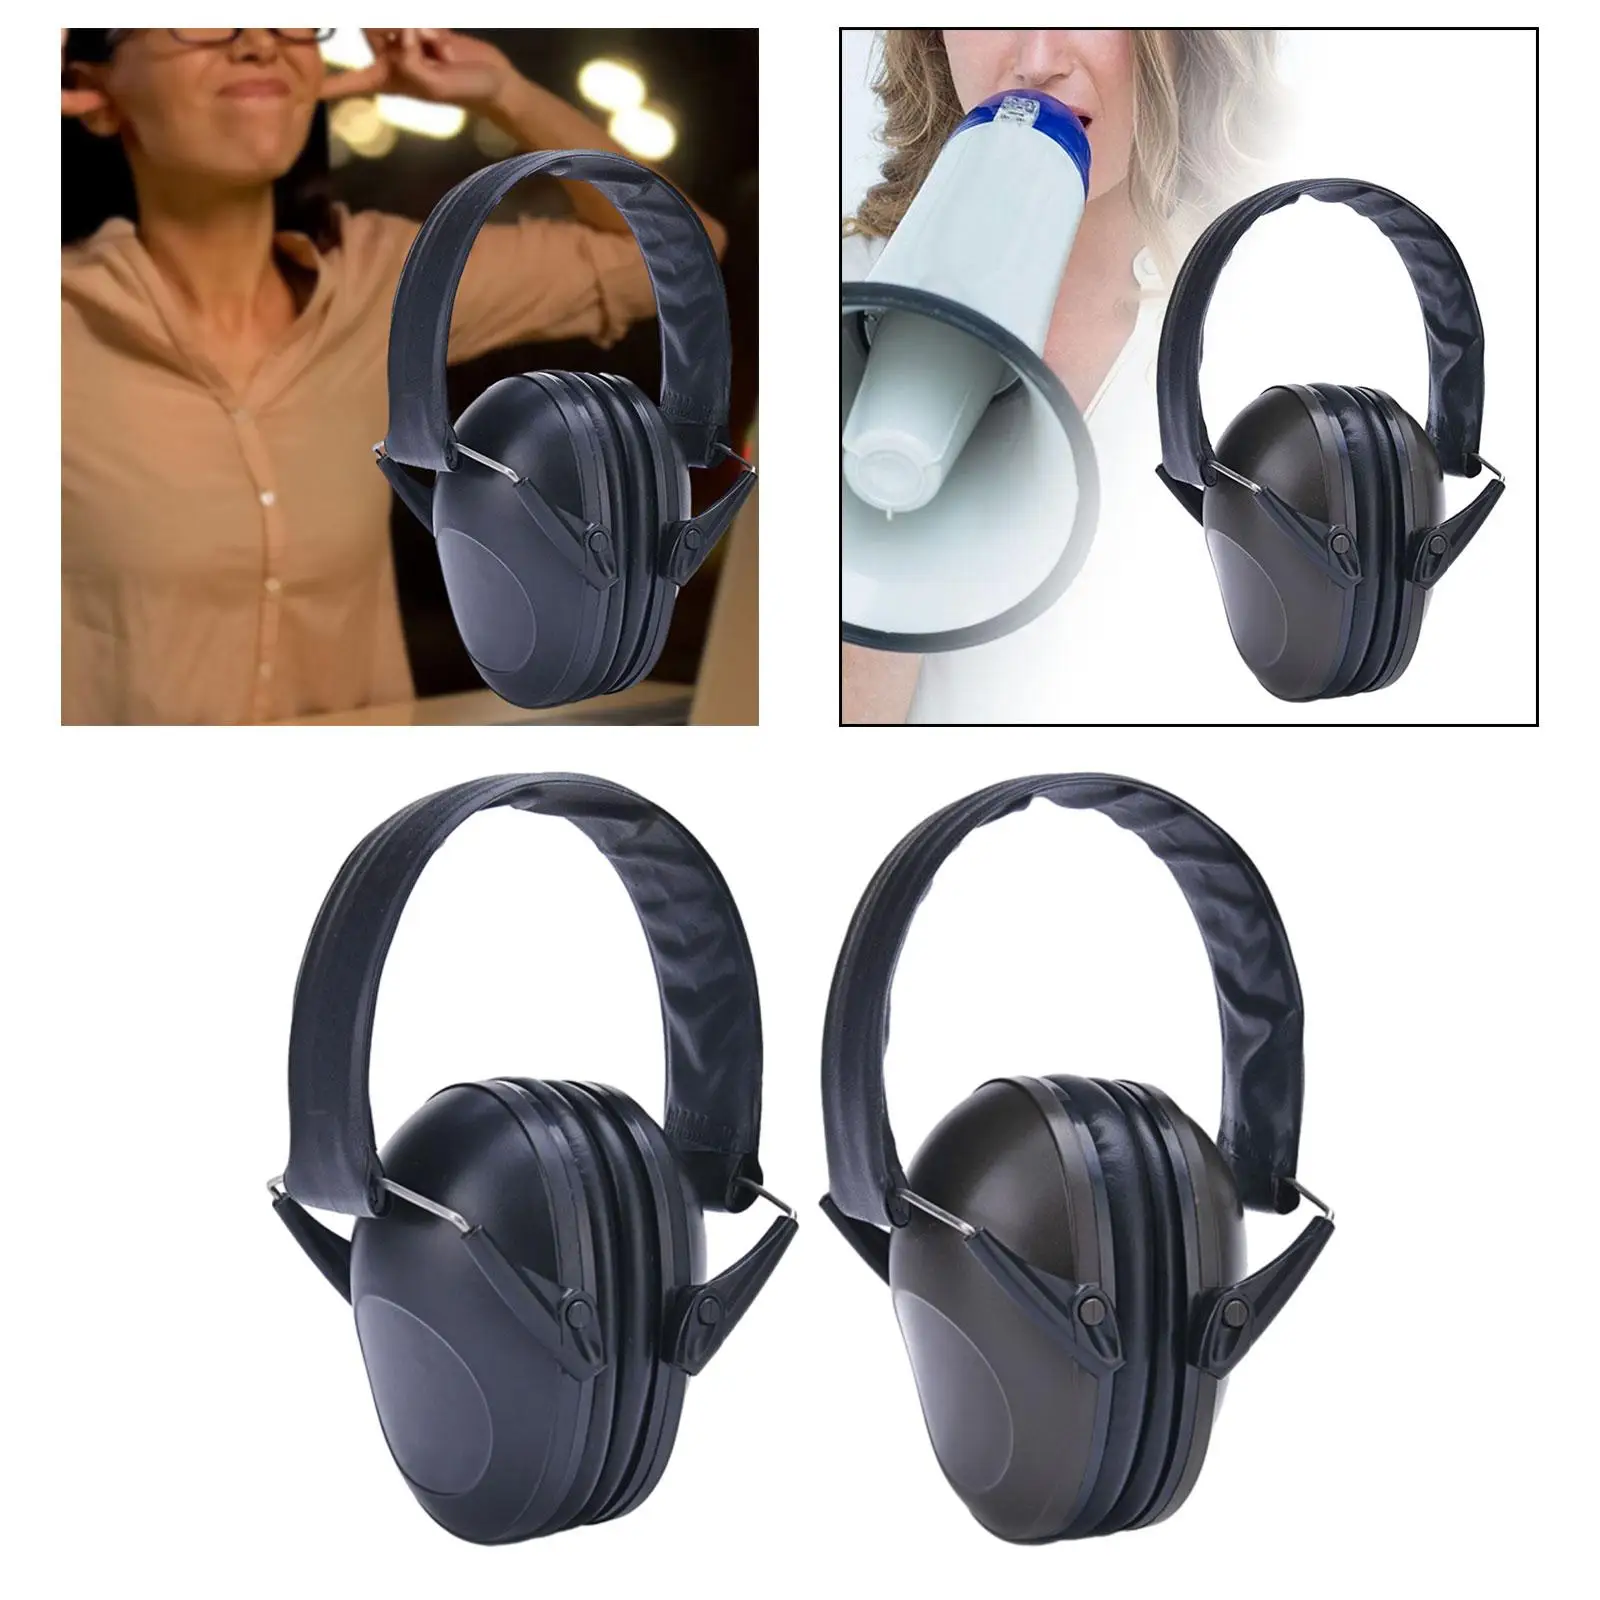 Protective Earmuffs Noise Reducing Soft Hearing Protectors Ear Protector for Office Studying Lawn Mowing Concerts Manufacturing